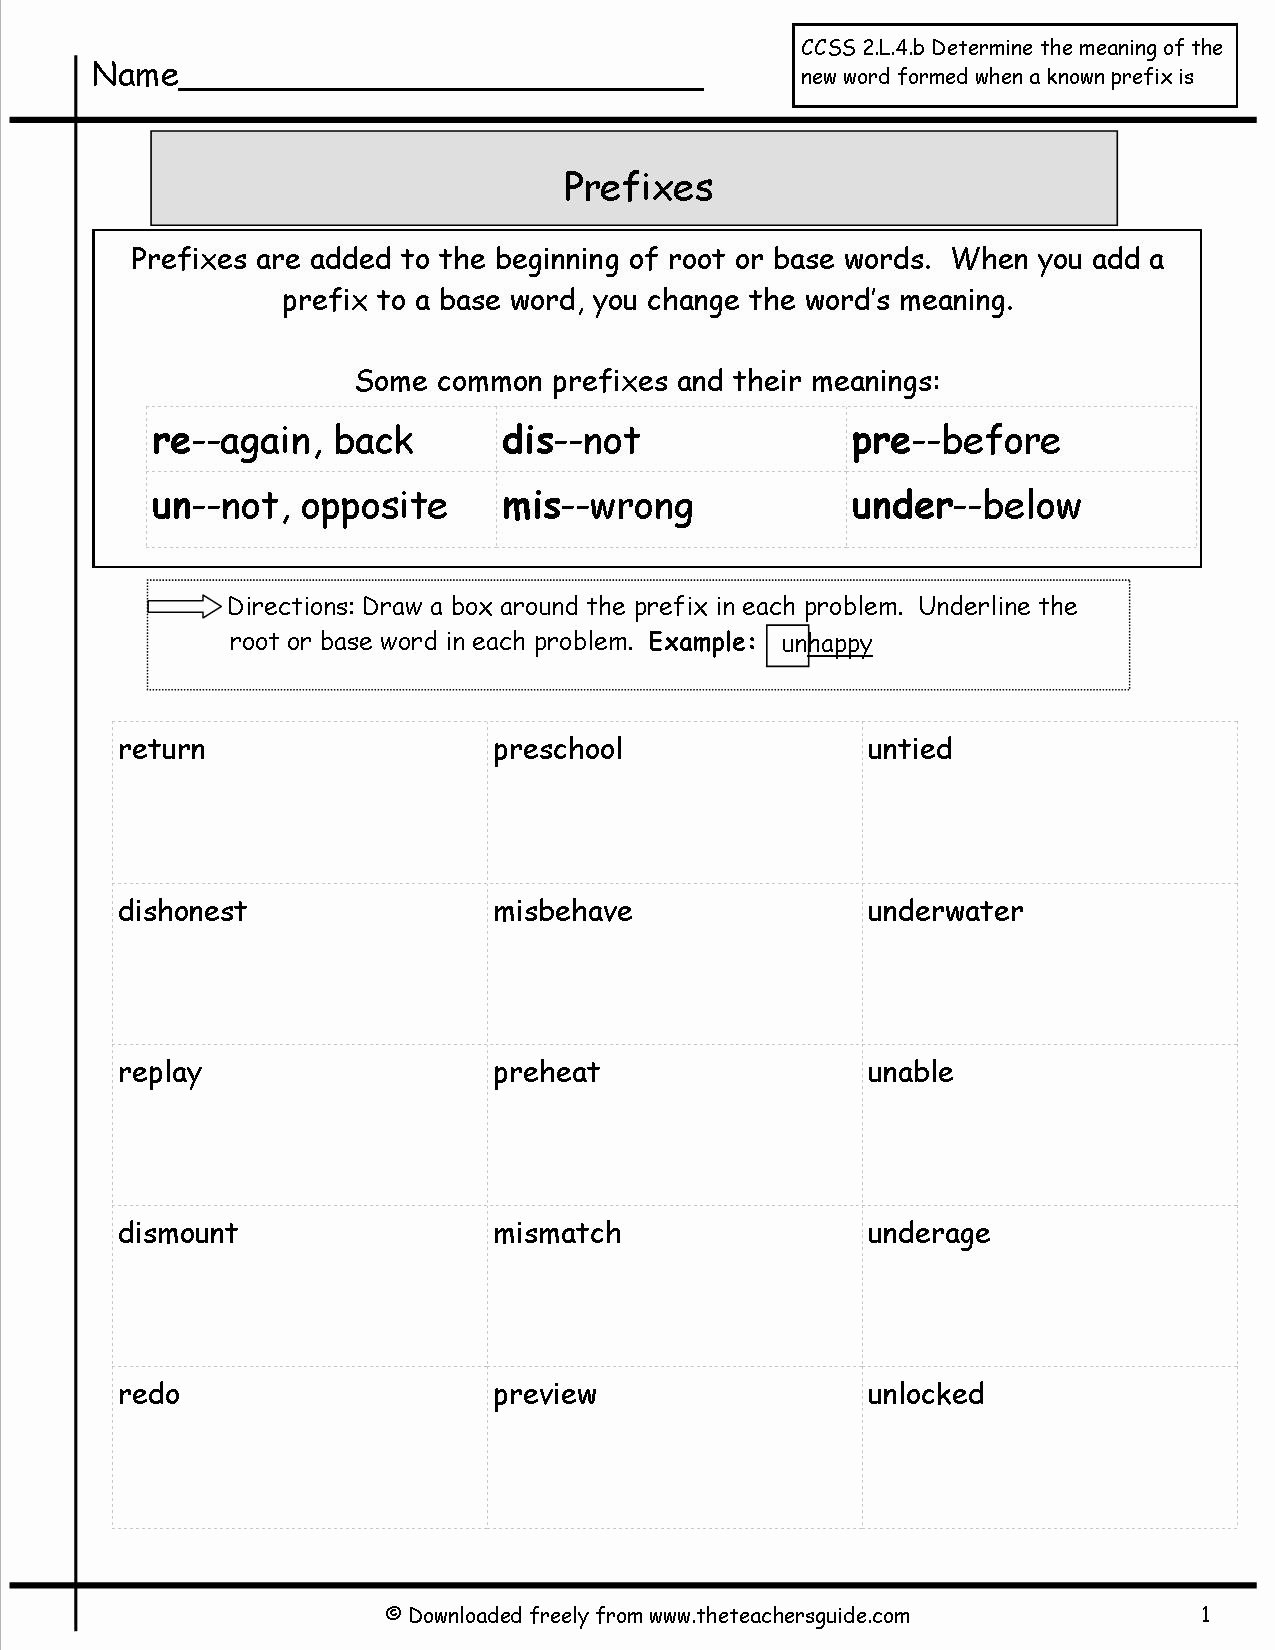 Medical Terminology Suffixes Worksheet New Affixes and Root Words